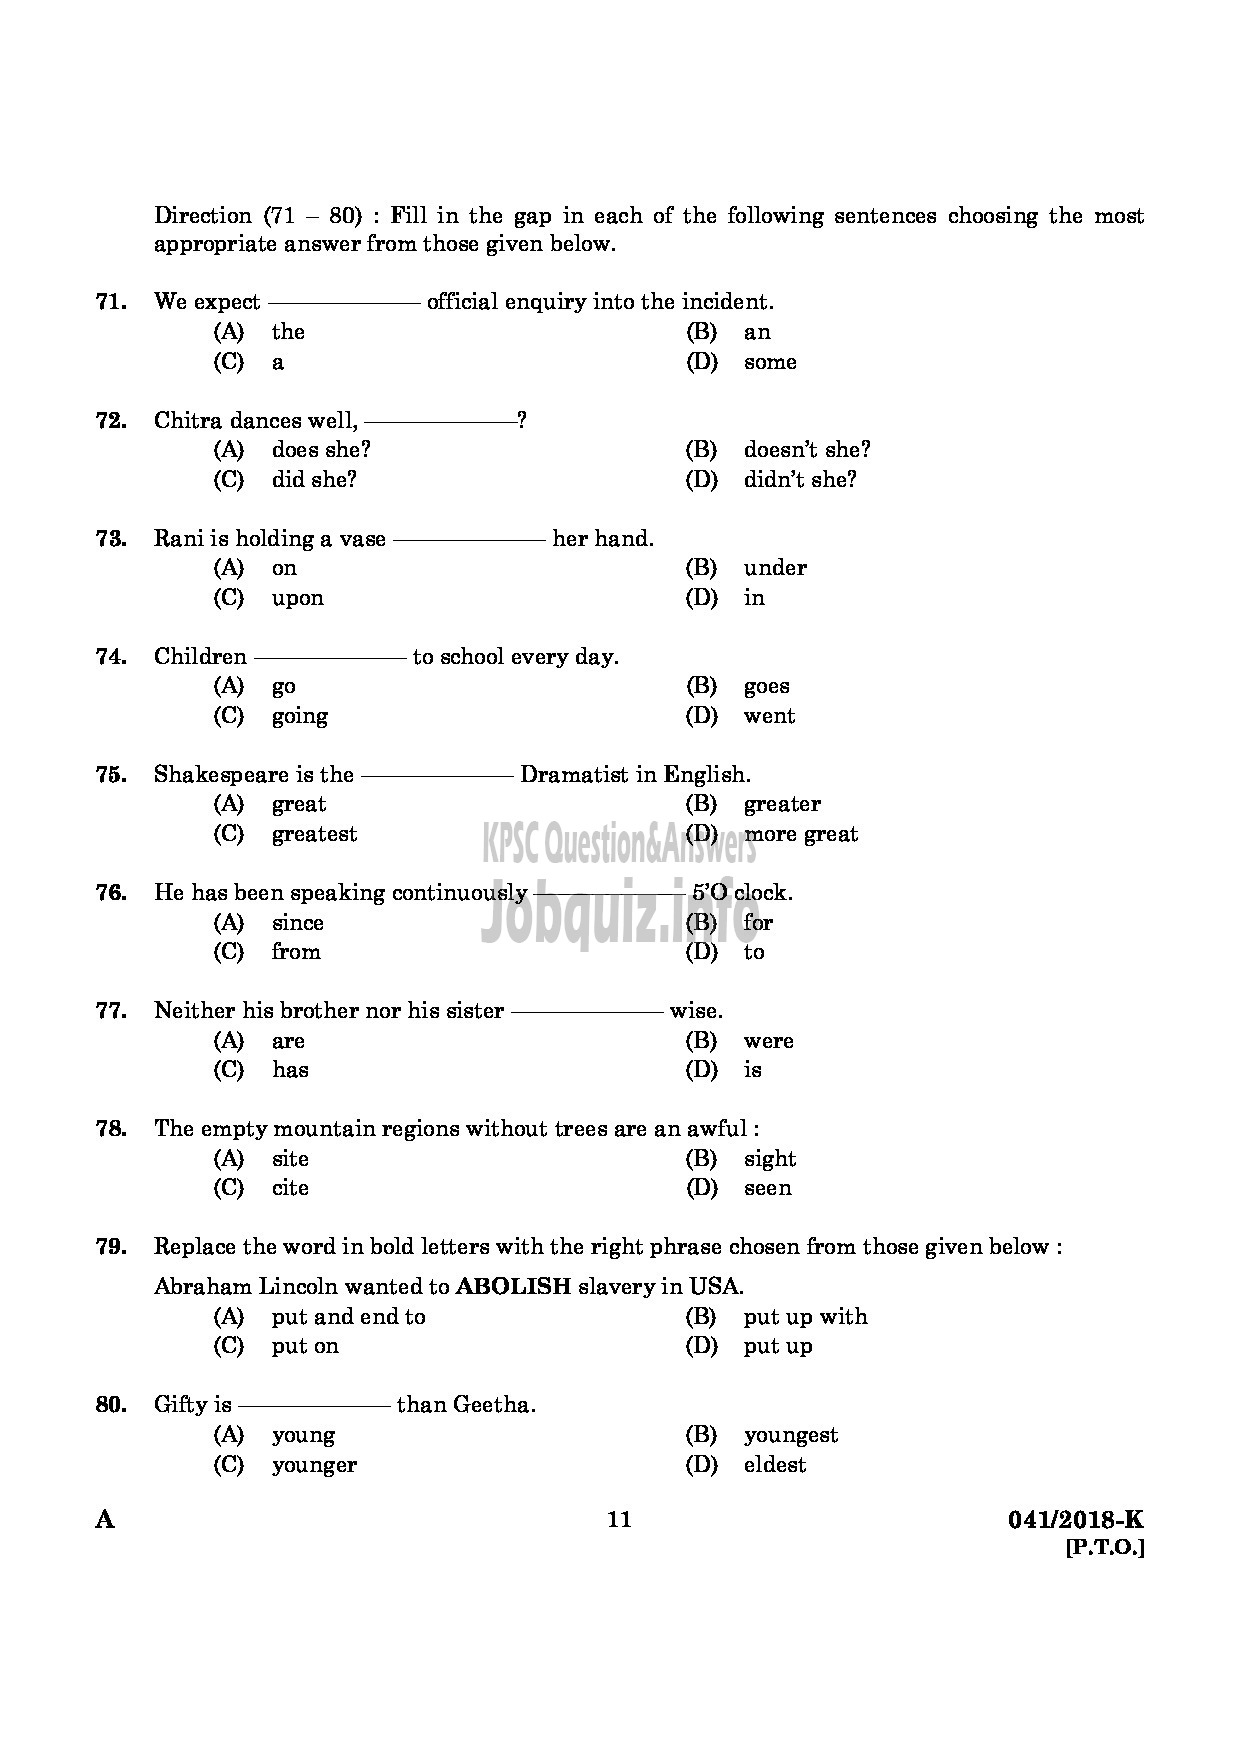 Kerala PSC Question Paper - WOMEN POLICE CONSTABLE NCA LC/AI AND MUSLIM POLICE KANNADA-9